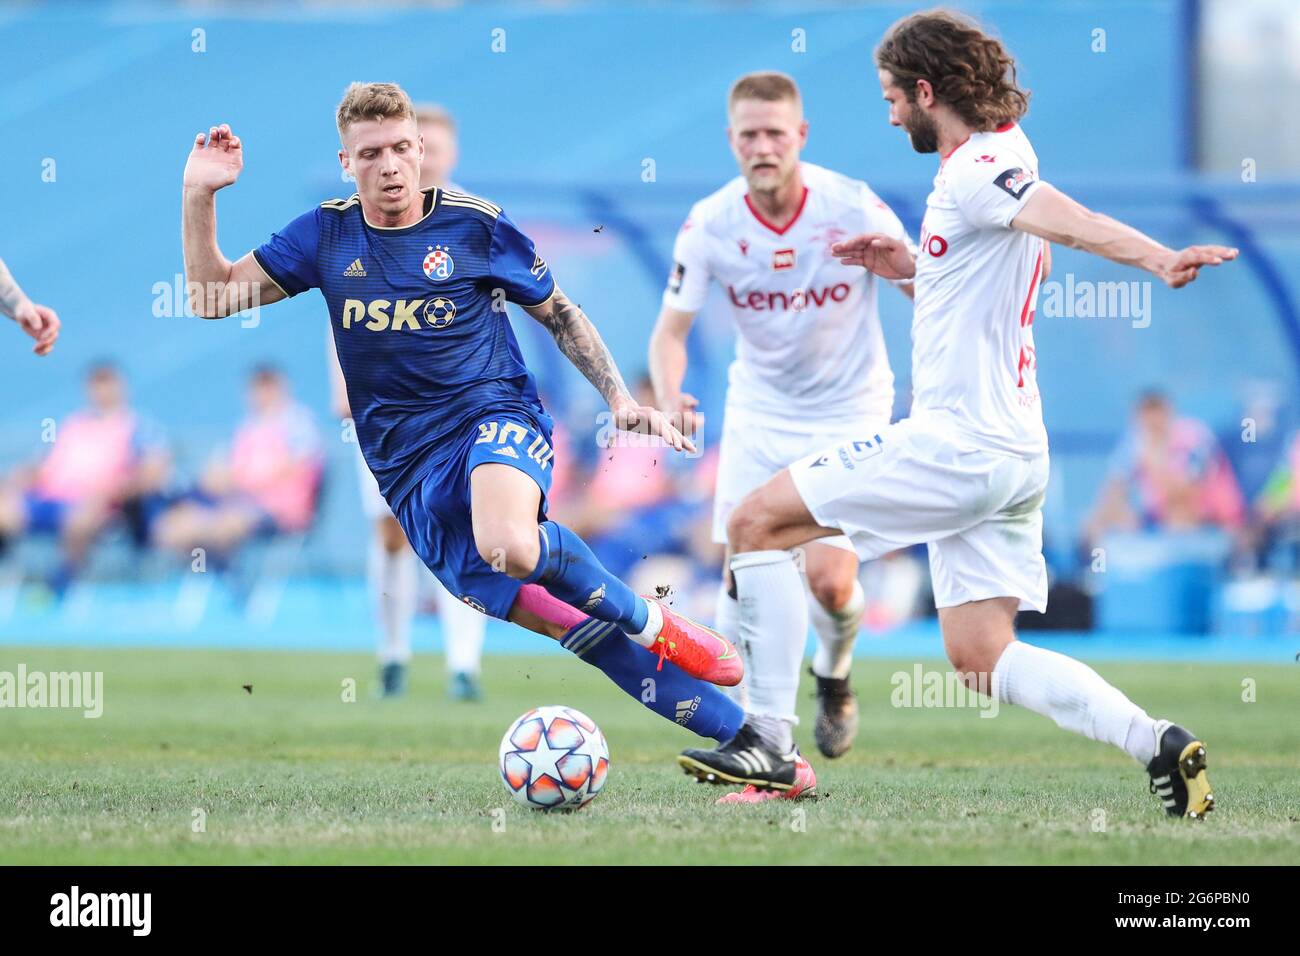 210708) -- ZAGREB, July 8, 2021 (Xinhua) -- Kristijan Jakic (L) of Dinamo  Zagreb controls the ball during the UEFA Champions League First Qualifying  Round match between Dinamo Zagreb and Valur at